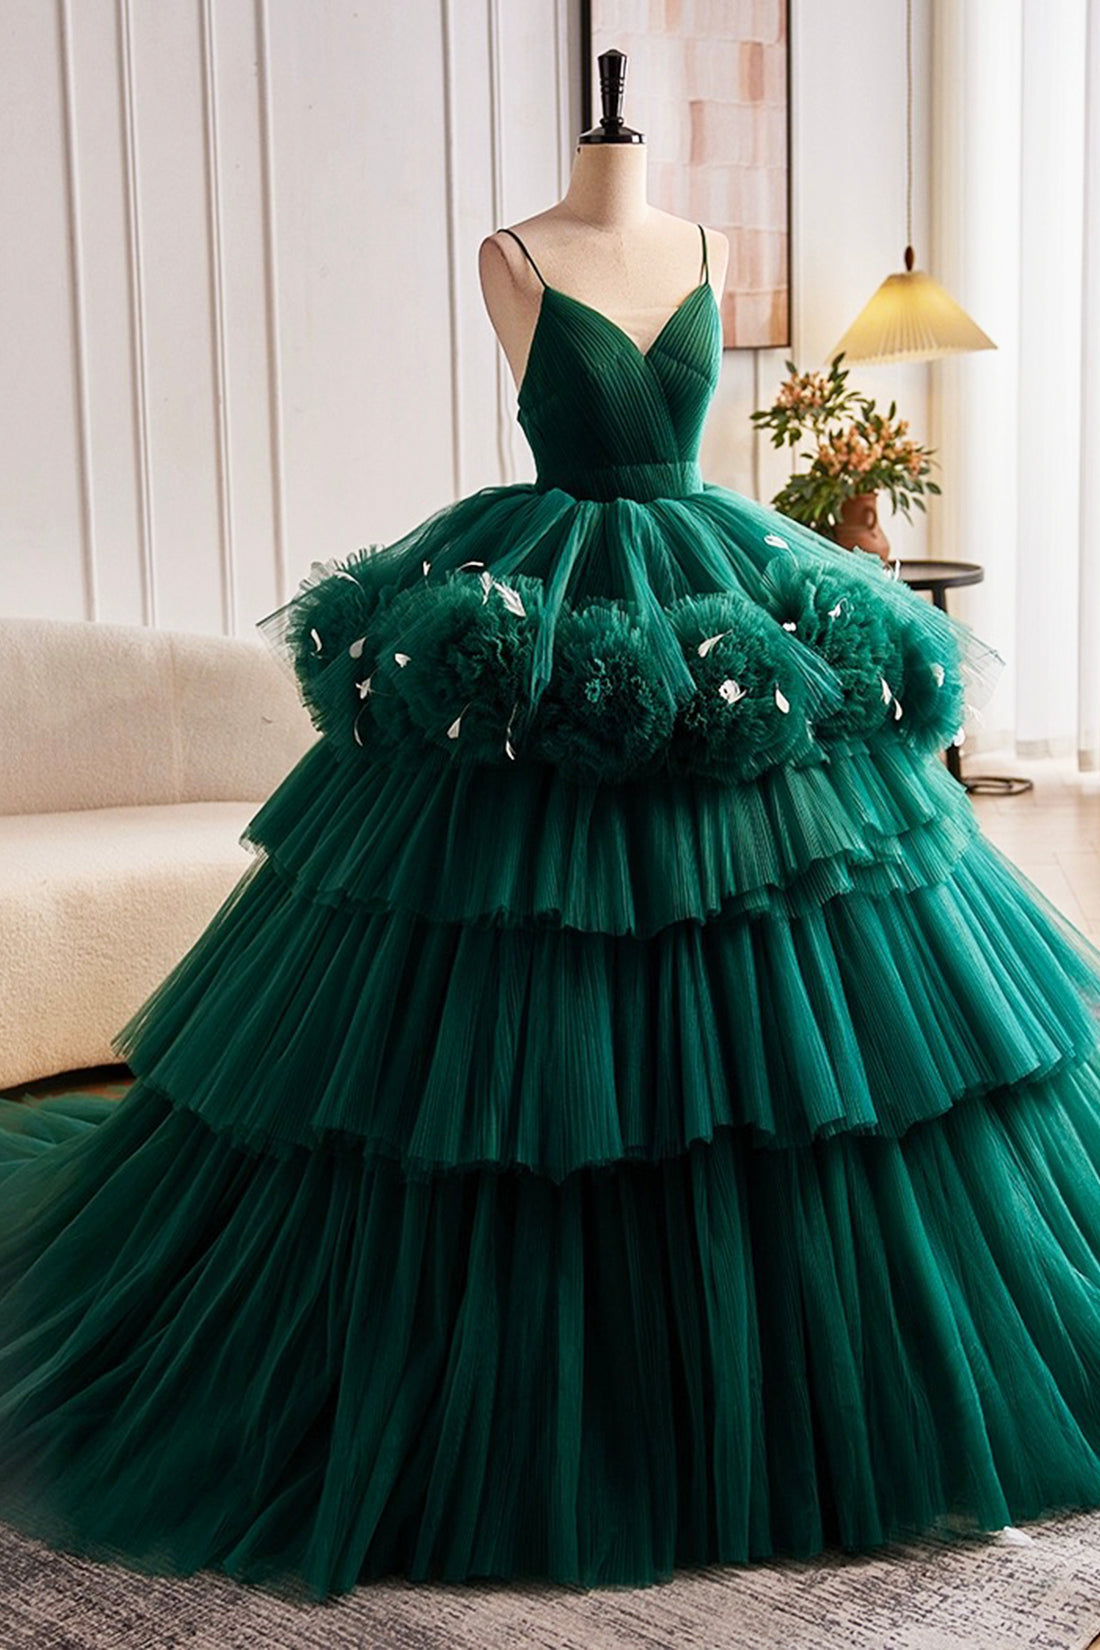 Green Spaghetti Strap V-Neck Ball Gown Dress, A-Line Backless Evening Formal Dress